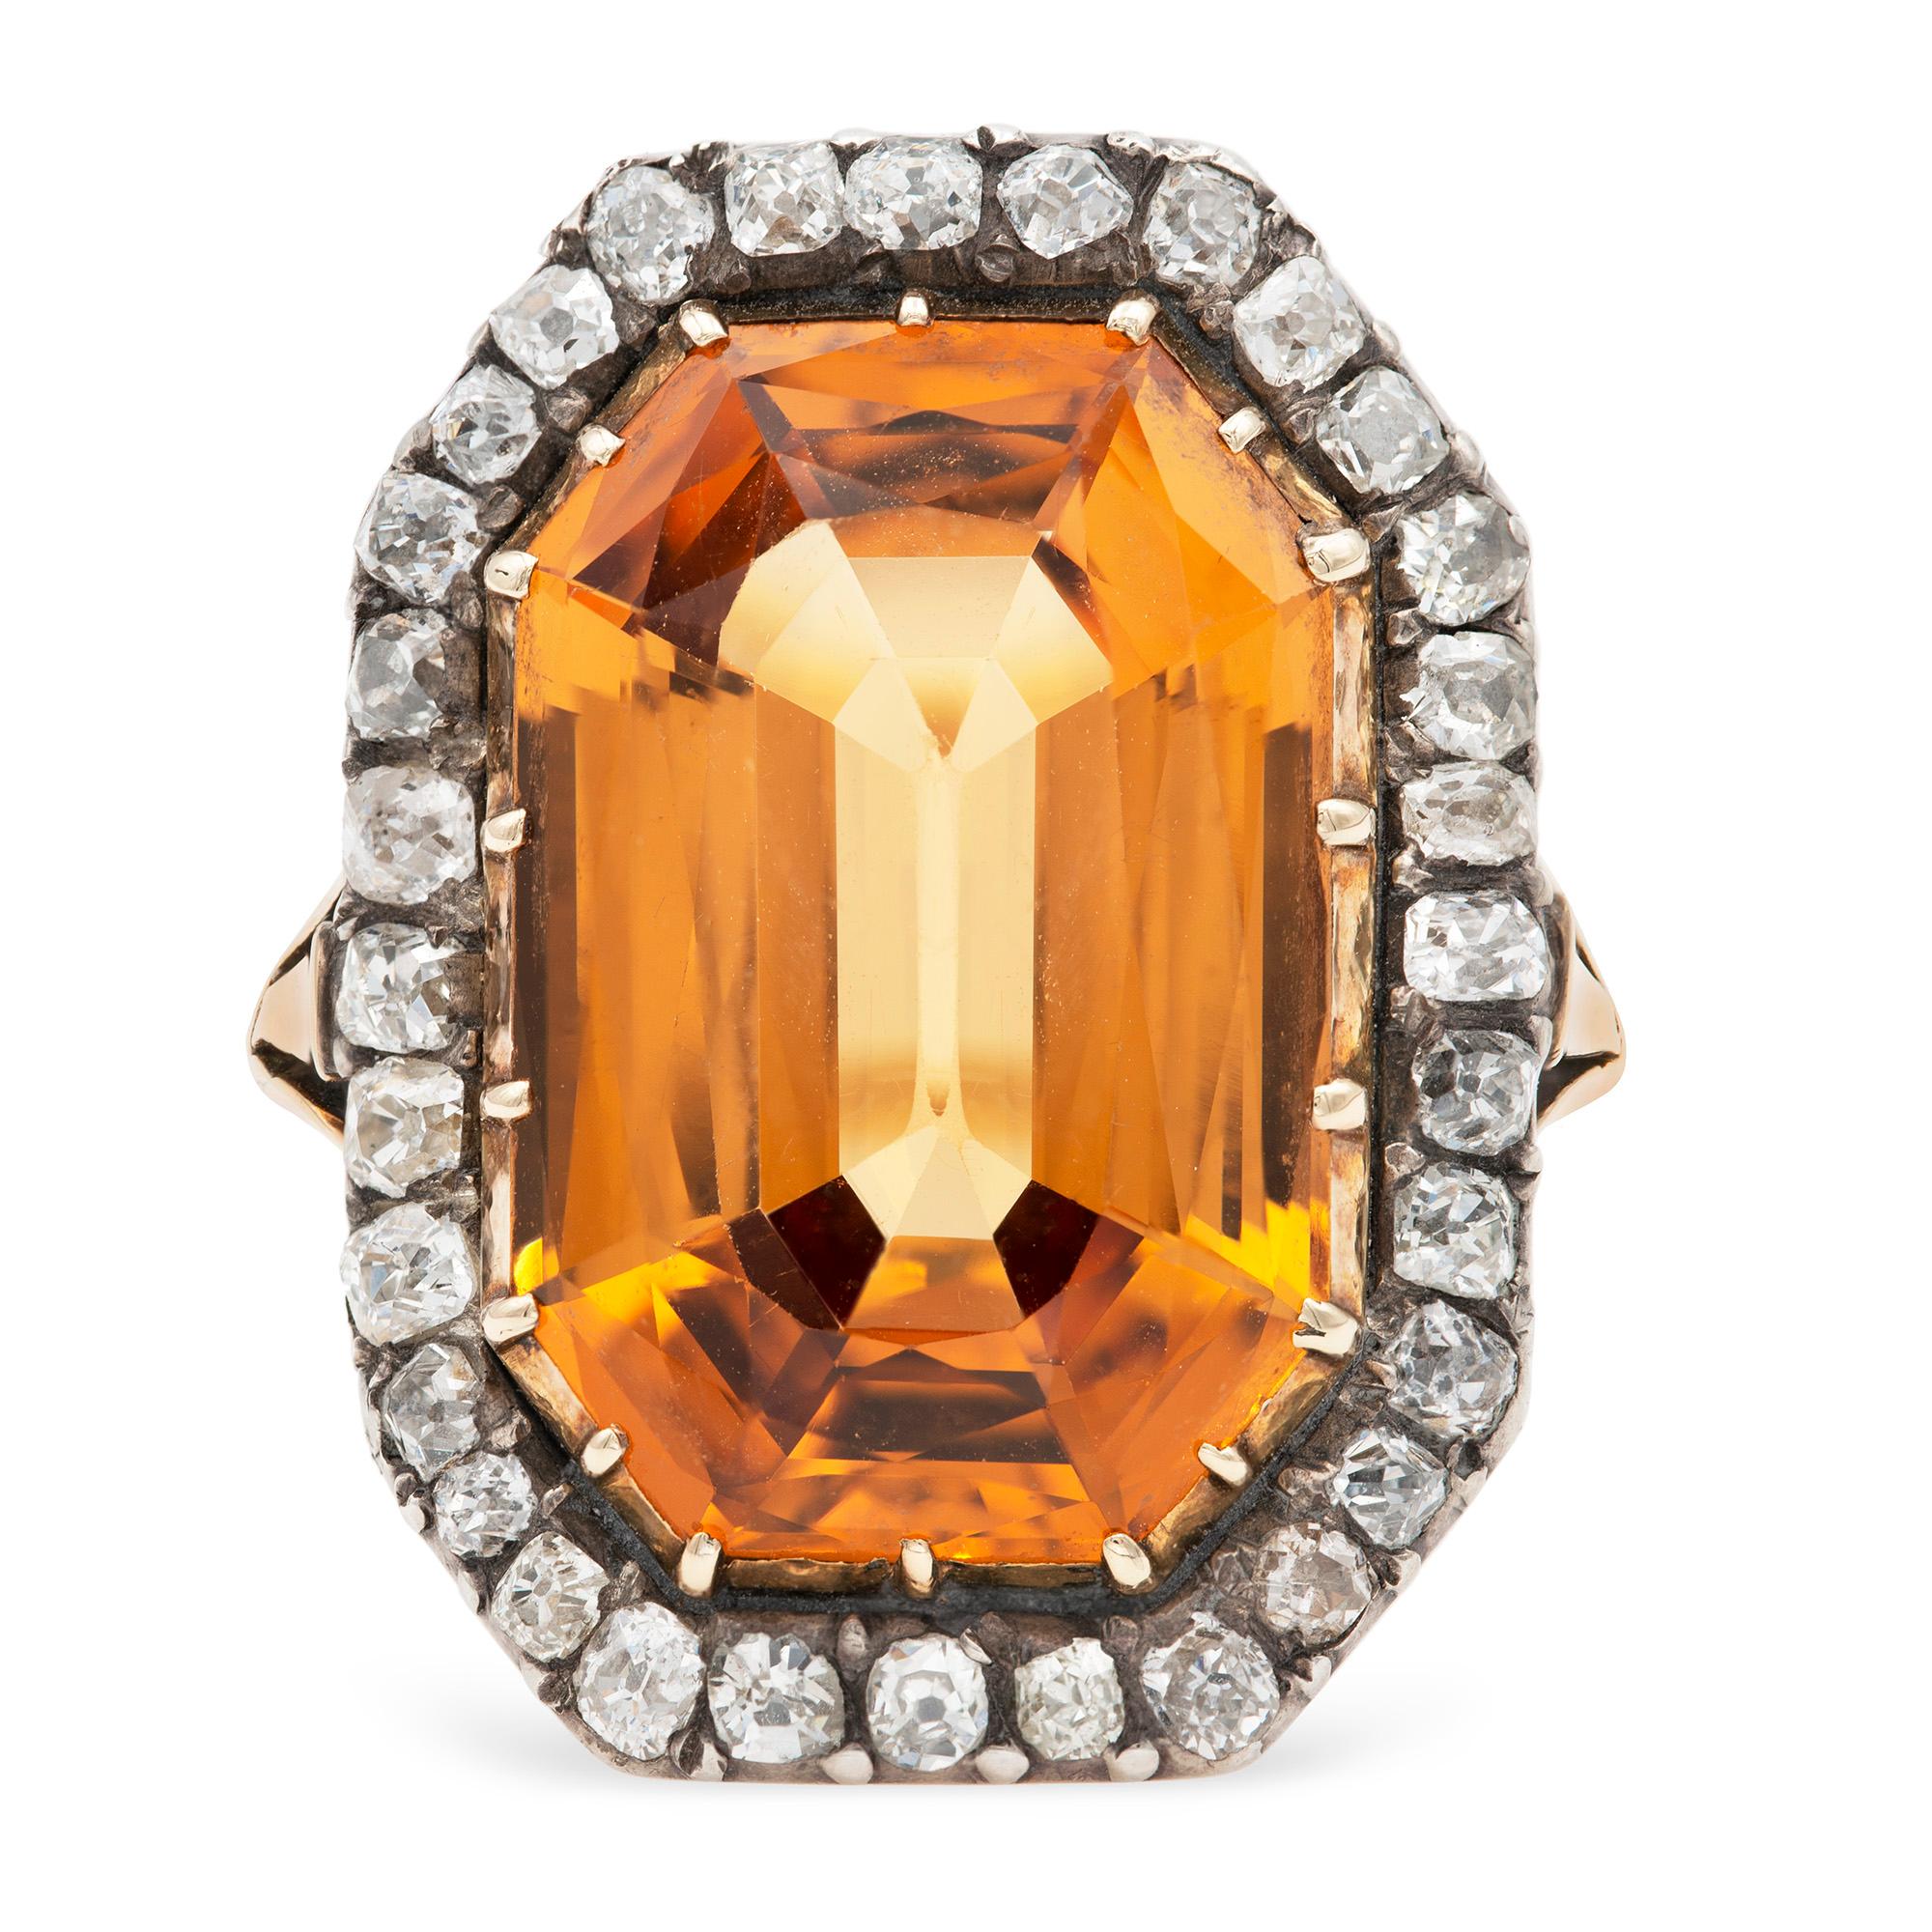 A Victorian topaz and diamond cluster ring, the octagonal-cut orange topaz measuring approximately 18.8 x 12.75 x 7.4mm and estimated to weigh 13.1 carats cut down set in gold collet, surrounded by old cut diamonds estimated to weigh 0.95 carats in